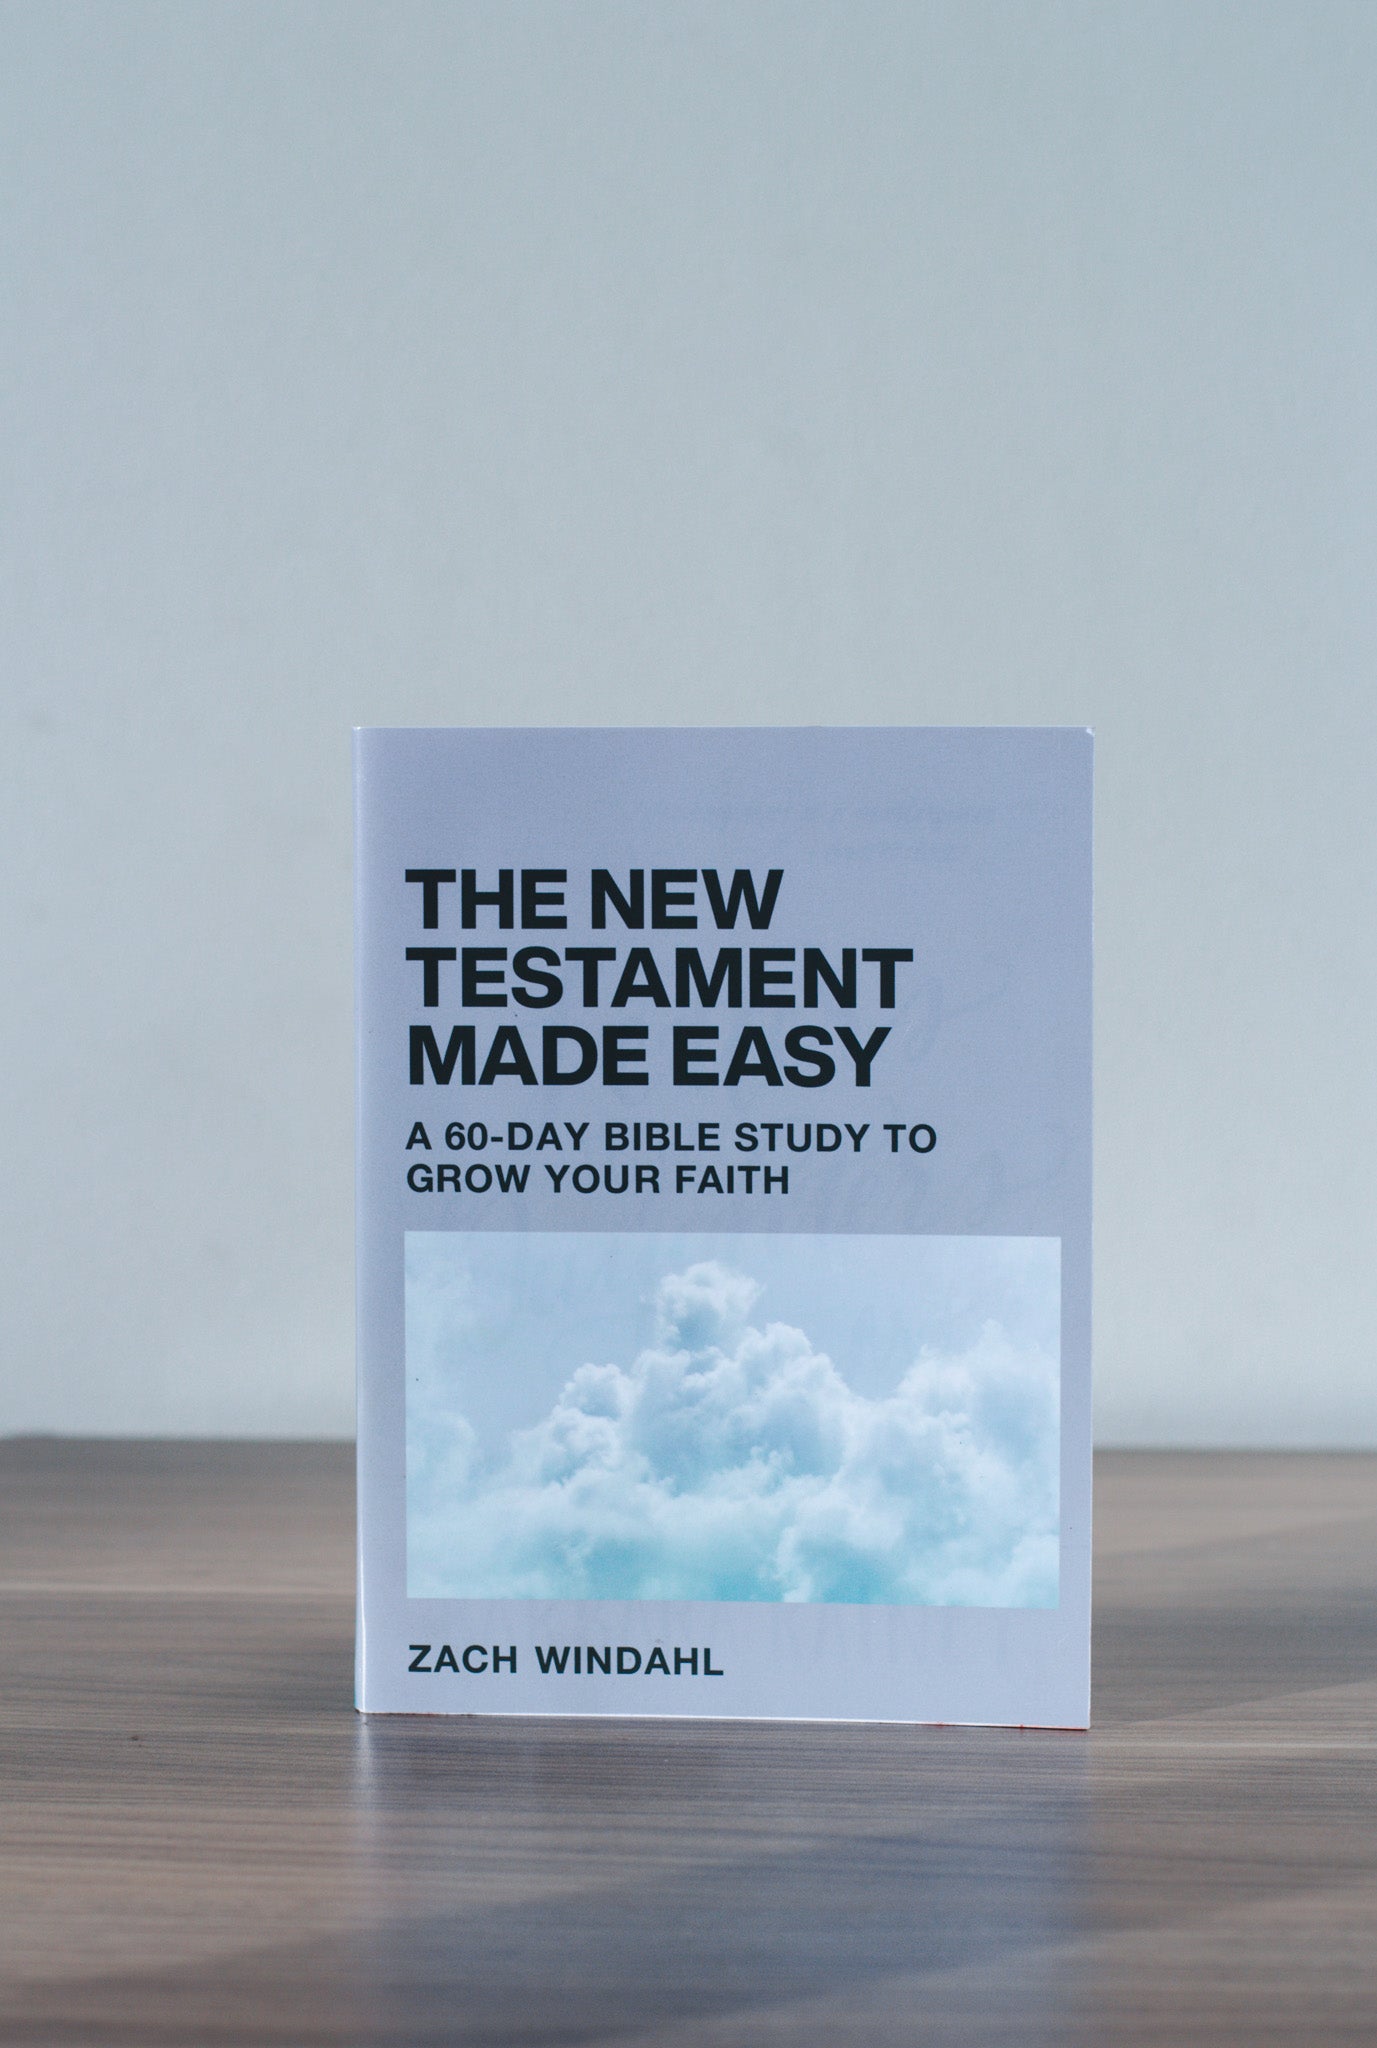 The New Testament Made Easy: A 60-Day Bible Study to Grow Your Faith - Sunday